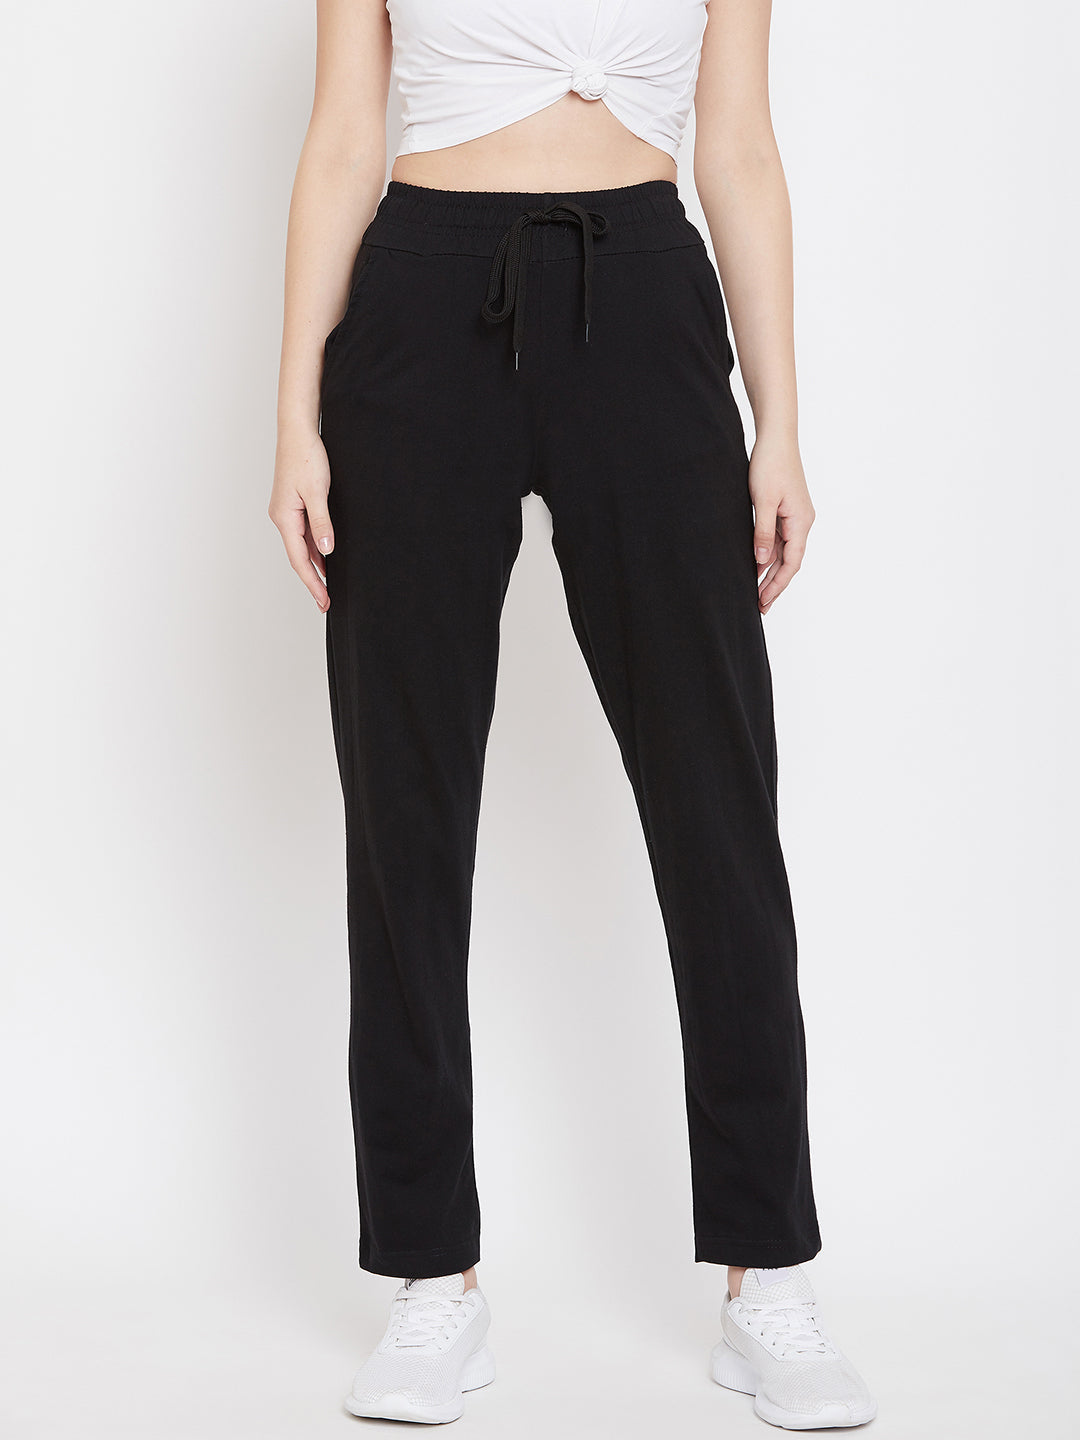 Women's Pack of 2 Track Pants-Black and Maroon